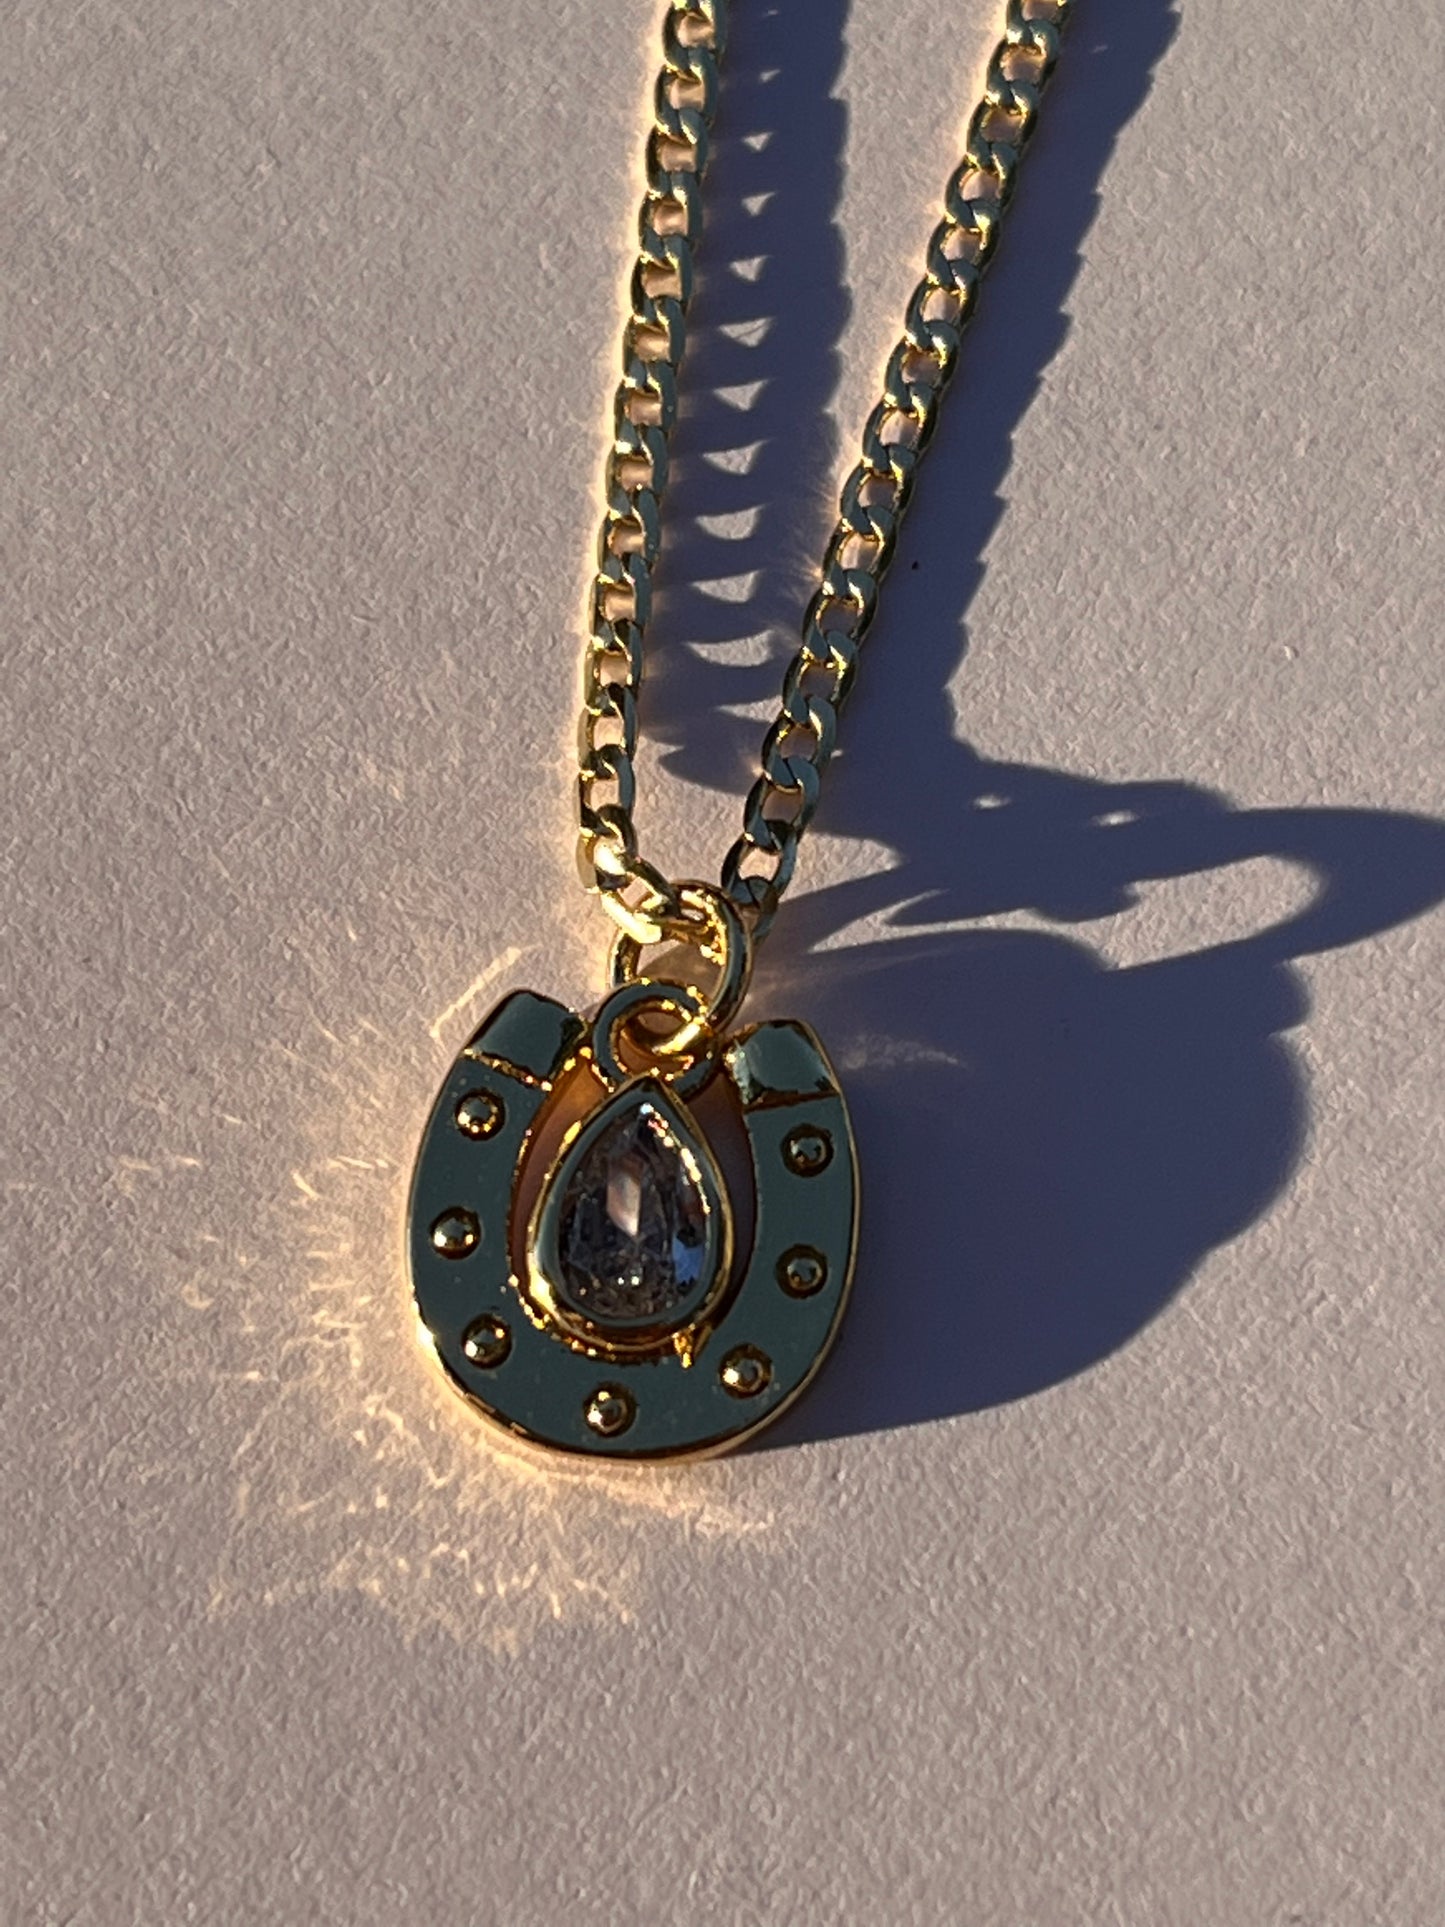 Good Lady Luck Necklace